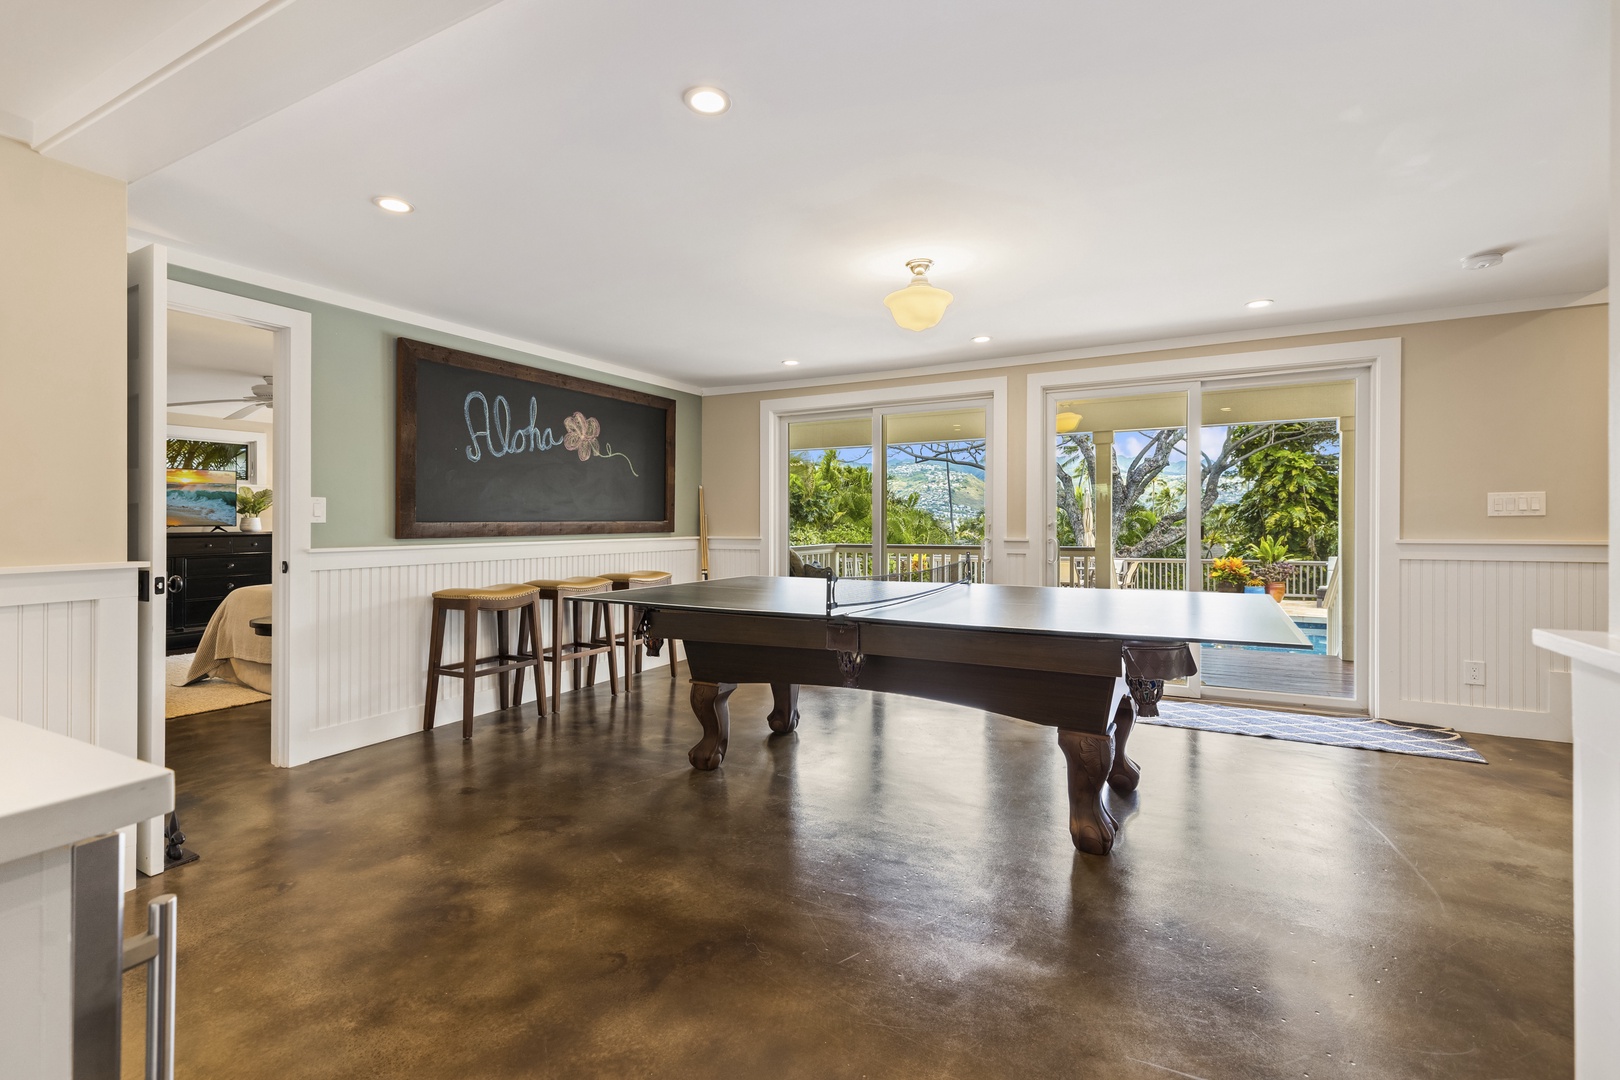 Honolulu Vacation Rentals, Hale Le'ahi* - Downstairs pool room and bar have direct access to the deck and pool area